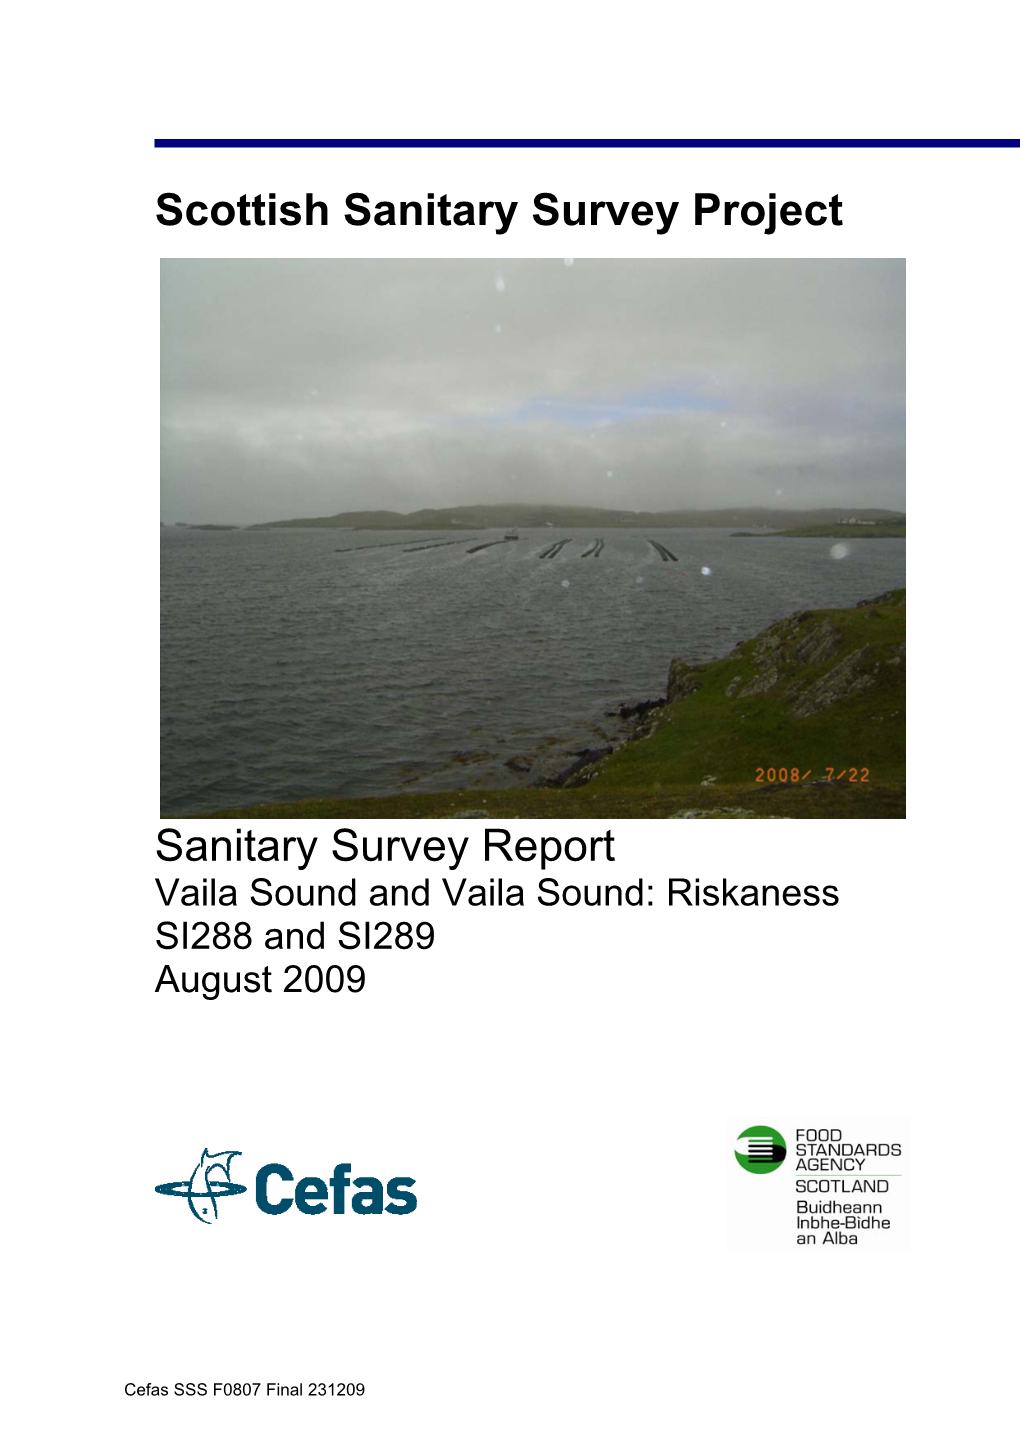 Sanitary Survey Report Vaila Sound and Vaila Sound: Riskaness SI288 and SI289 August 2009